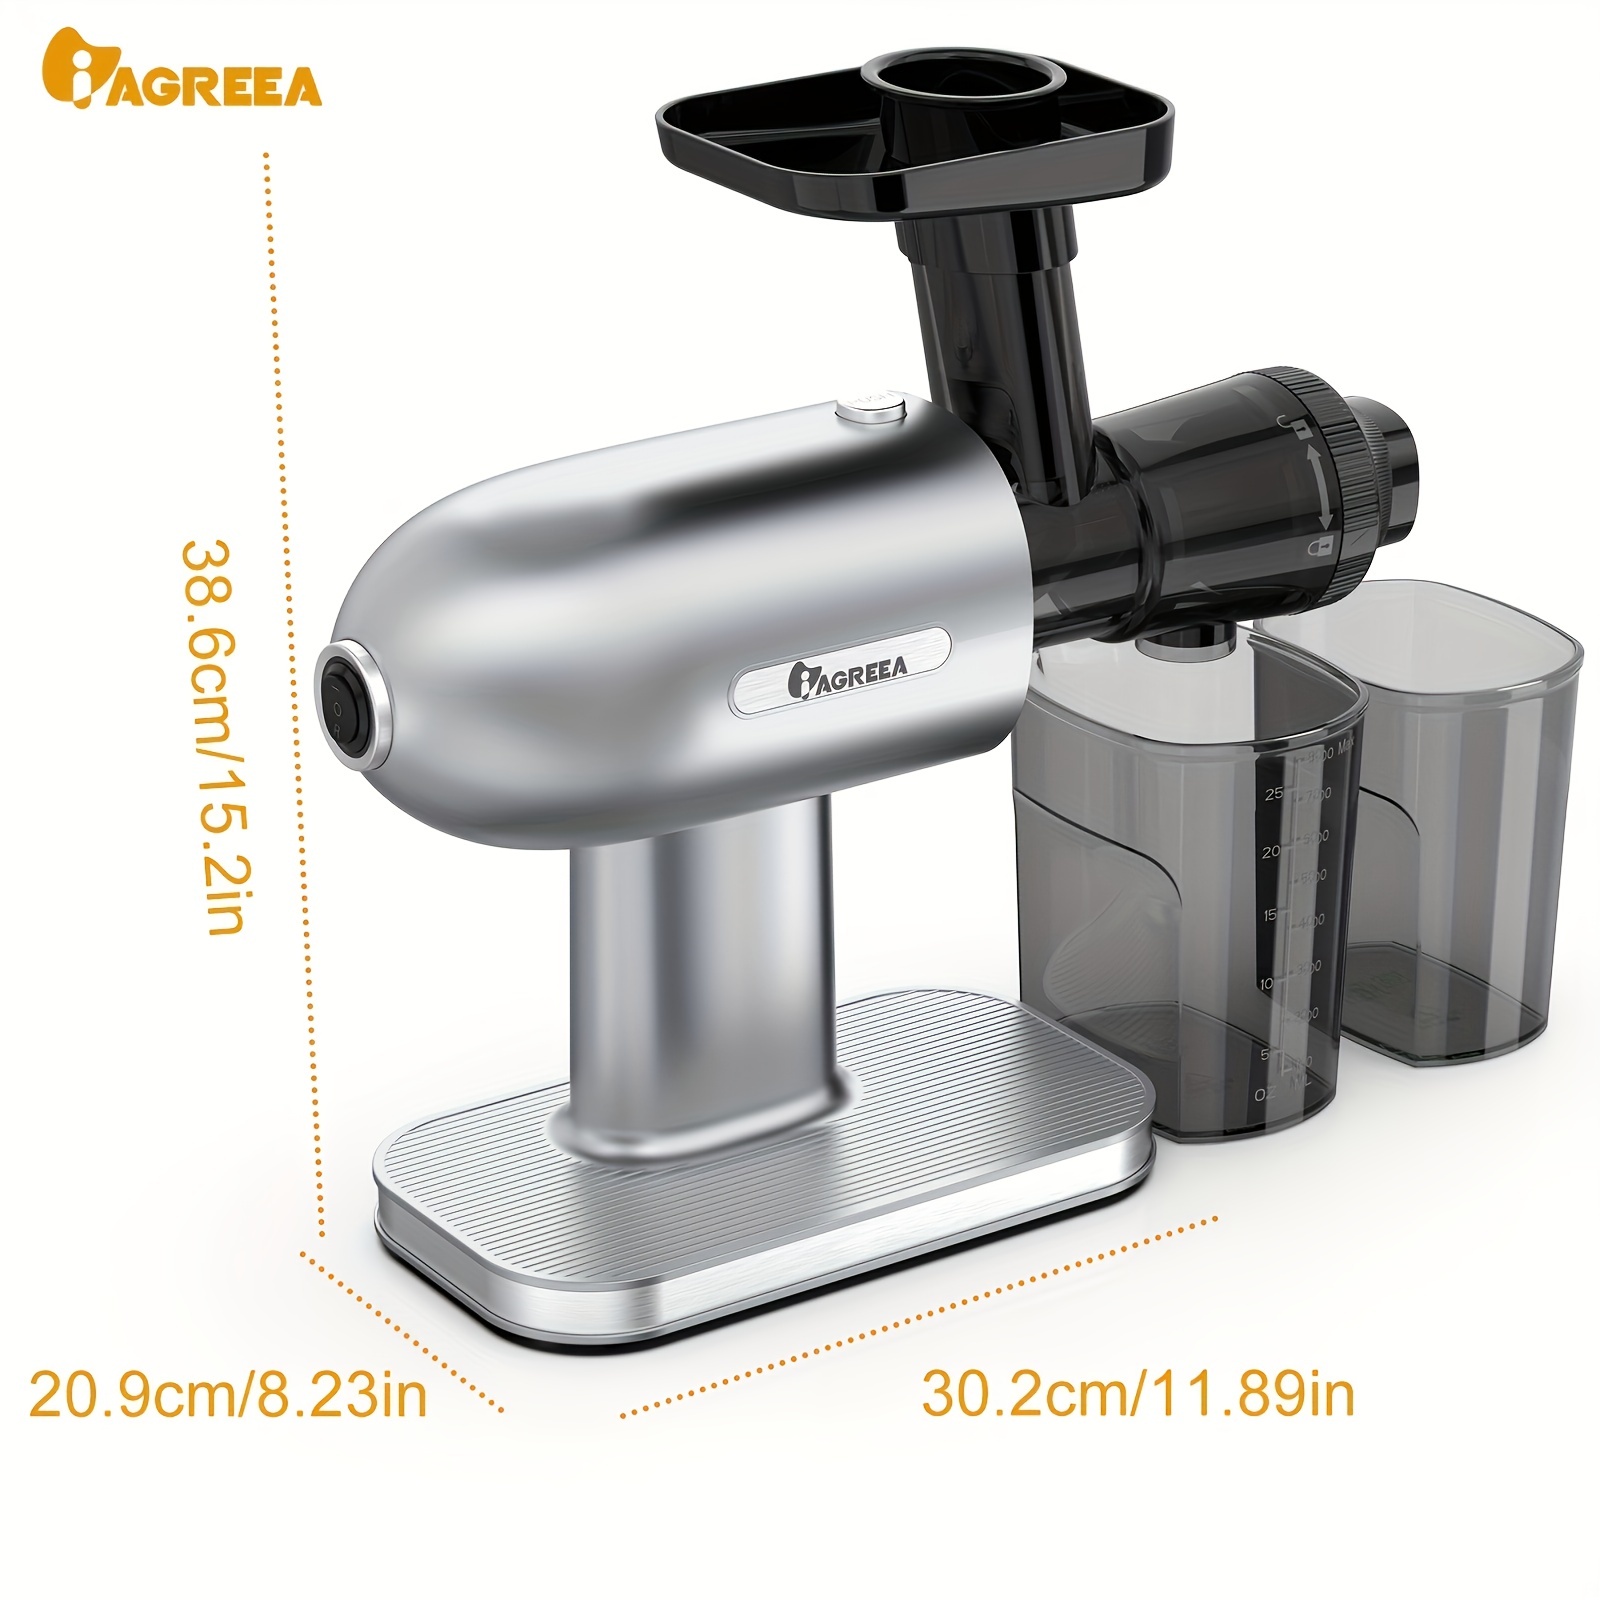 iagreea cold press juicer slow juicer machines for vegetable and fruit compact small space saving masticating juicer ultra power juicer maker with reverse function details 0